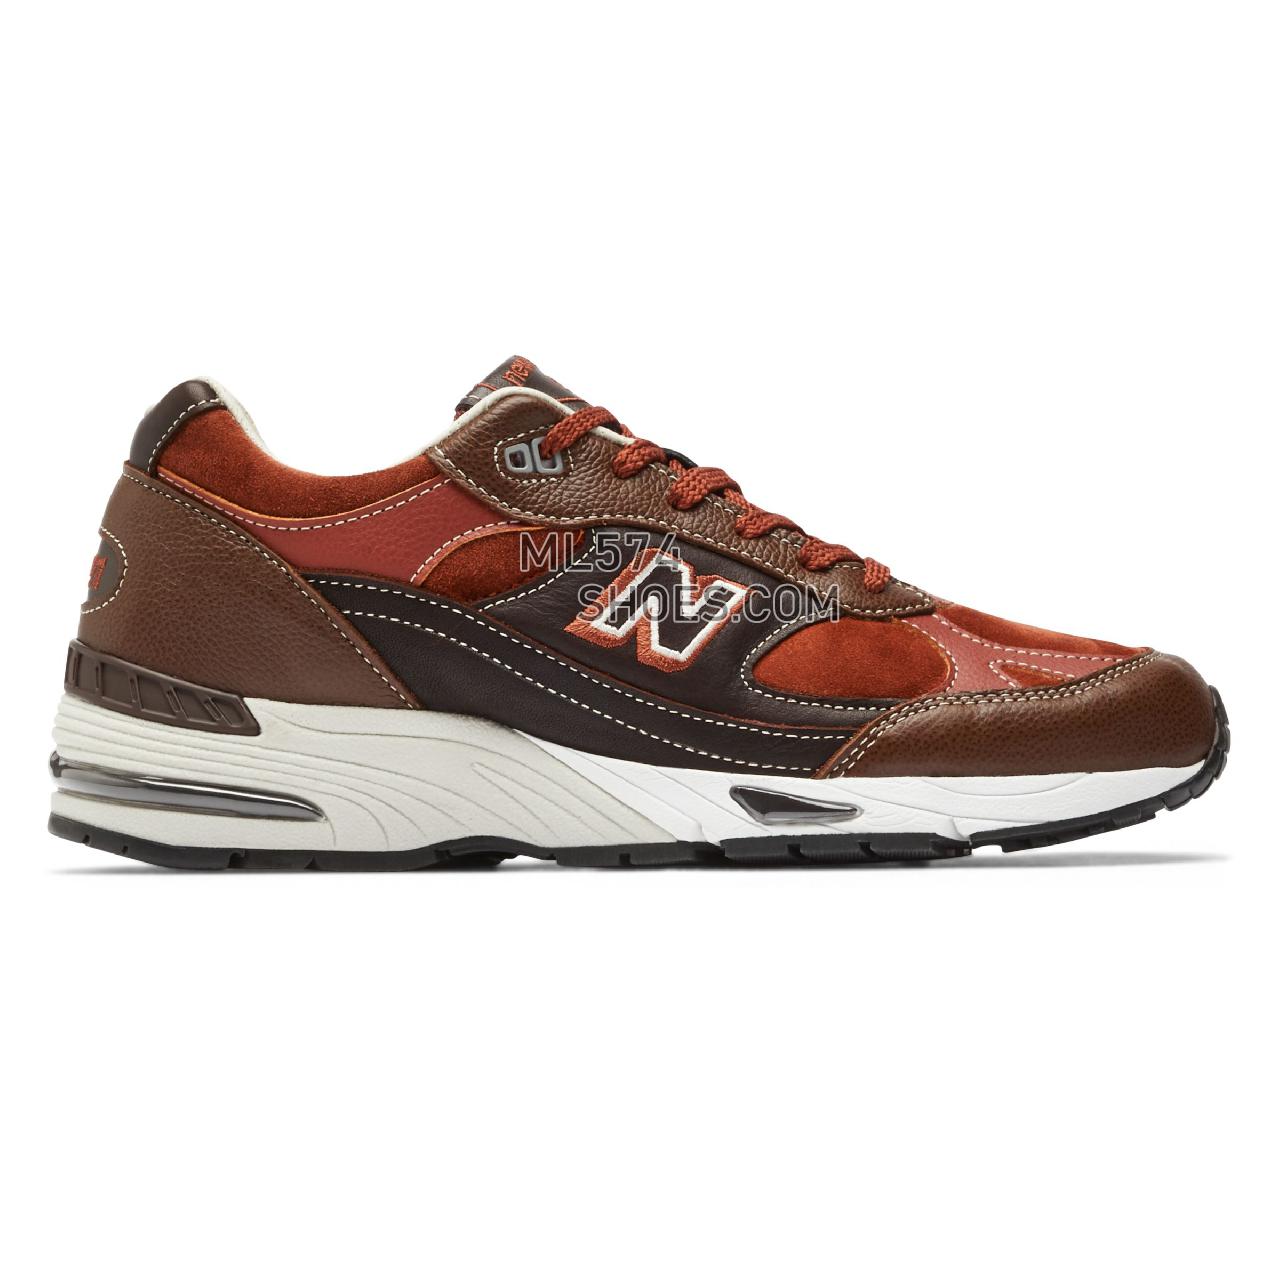 New Balance MADE in UK 991 - Men's Made in USA And UK Sneakers - Delicioso with Carafe and Pale Khaki - M991BTG